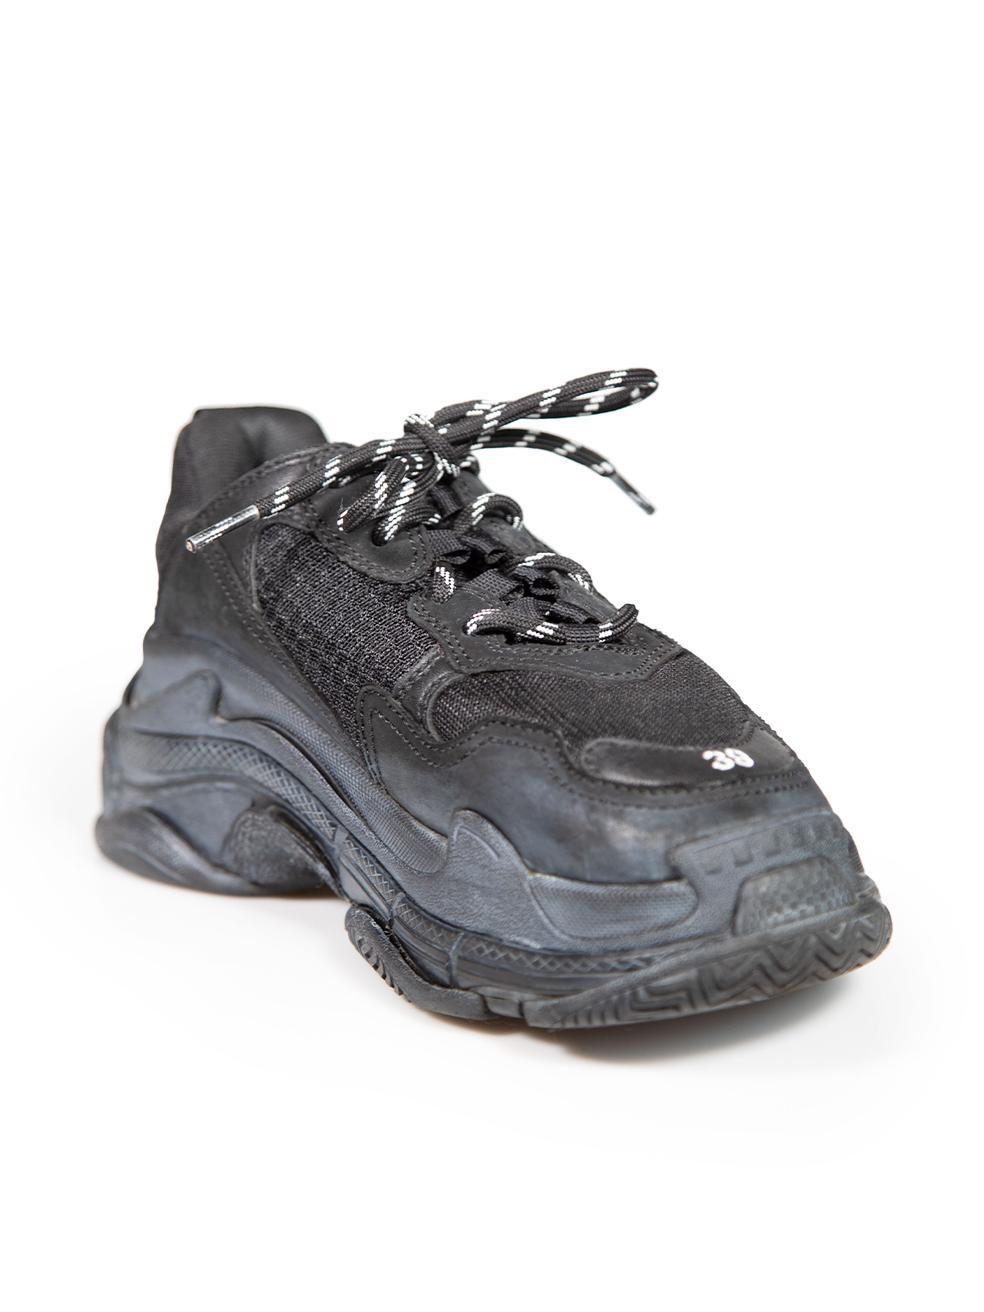 CONDITION is Very good. Minimal wear to shoes is evident. Minimal abrasions to the front of both shoes. Overall discolouration on both soles of the shoes on this used Balenciaga designer resale item.
 
 
 
 Details
 
 
 Model: Triple S
 
 Black
 
